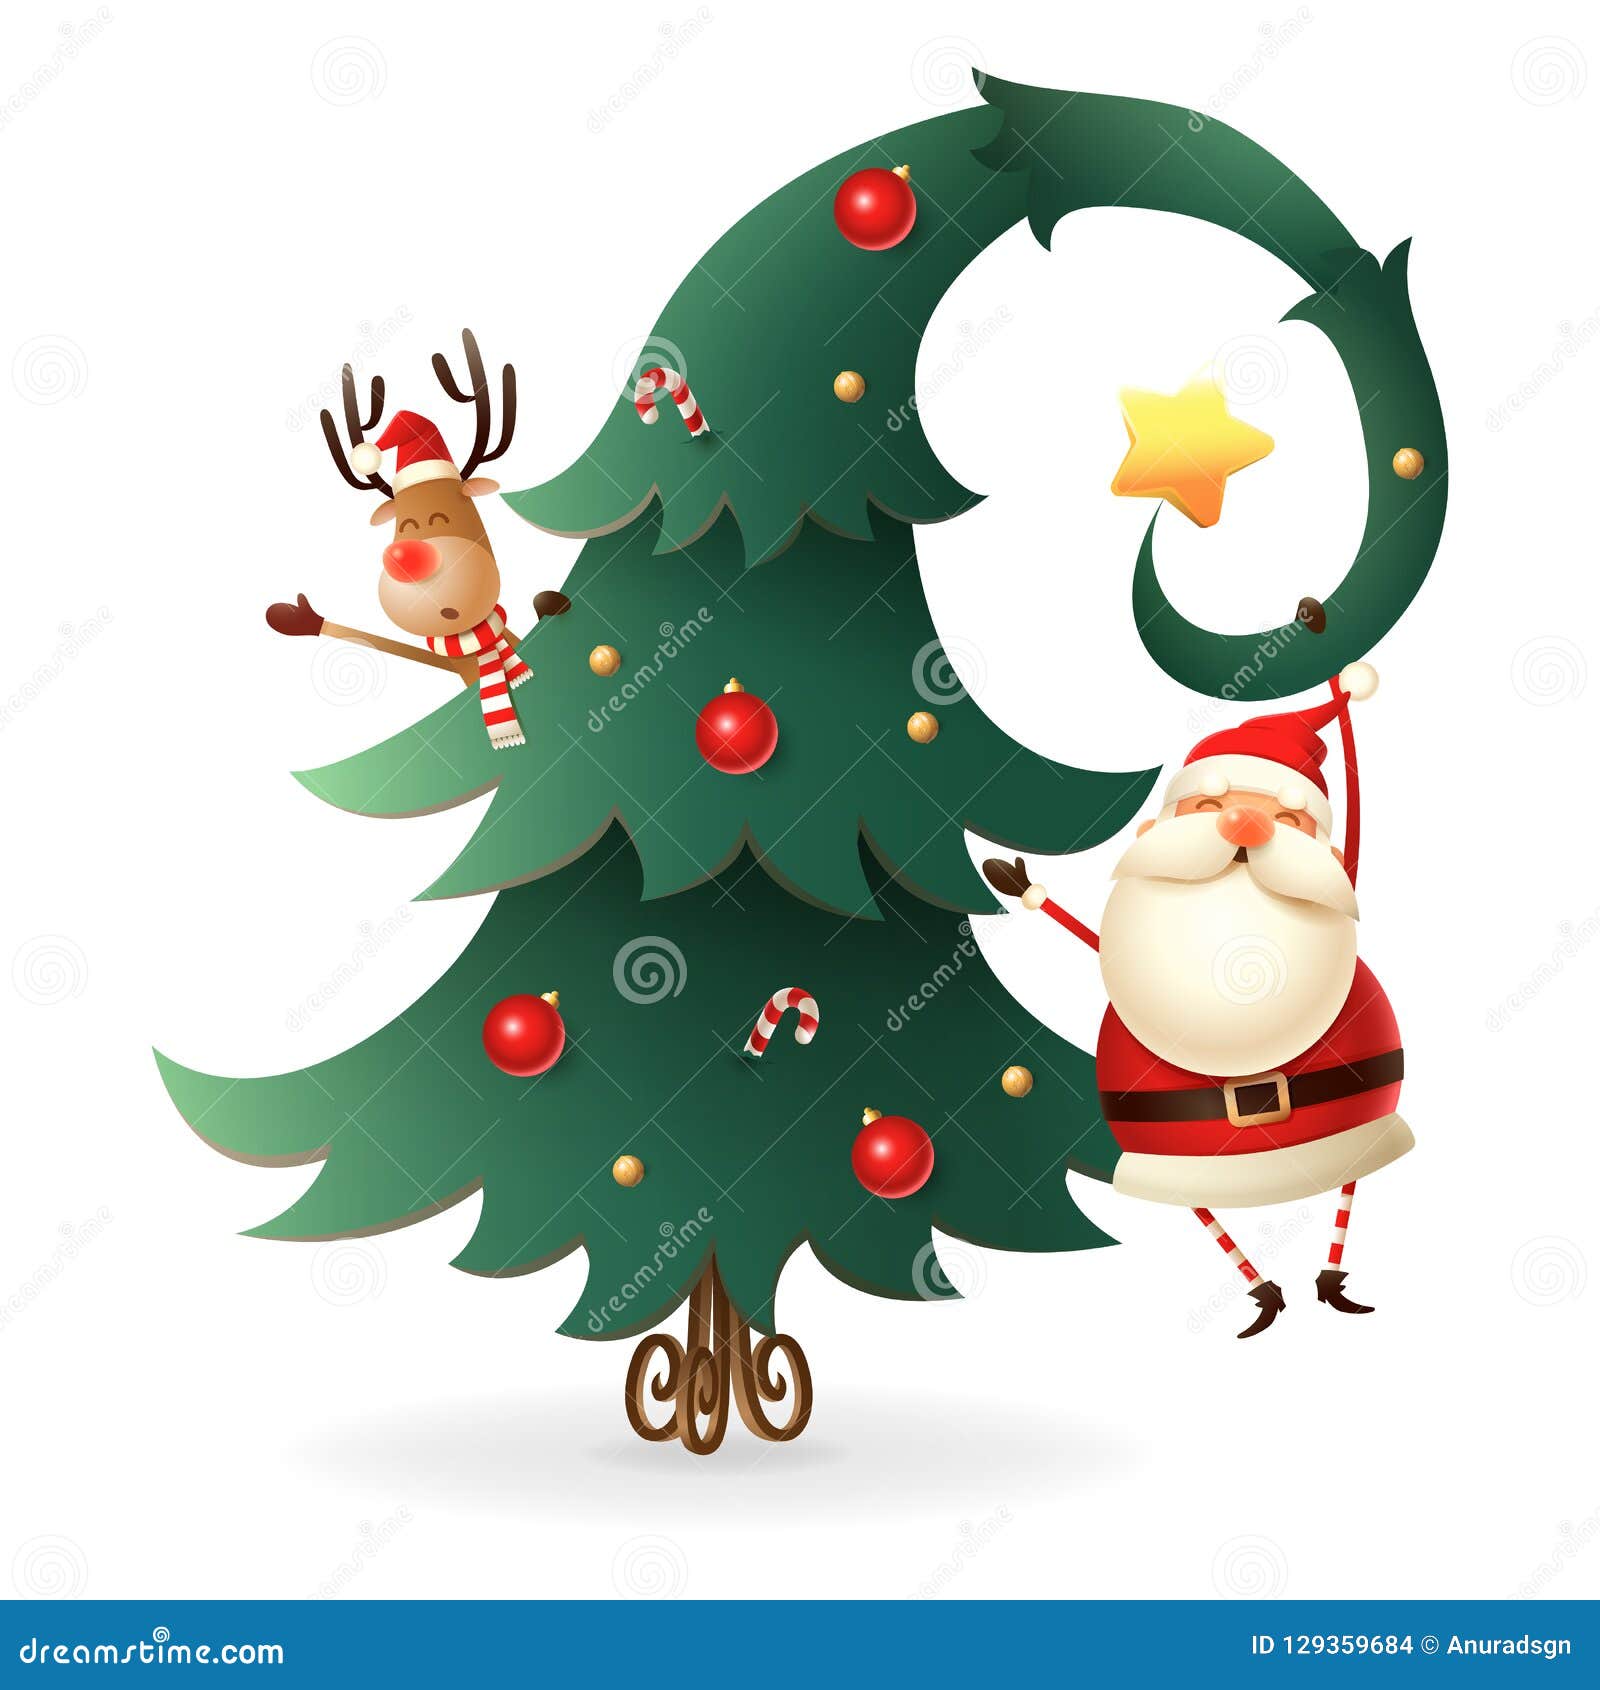 Santa Claus and Reindeer Around the Christmas Tree on Transparent Background.  Scandinavian Gnomes Style. Stock Vector - Illustration of gnomes, beard:  129359684